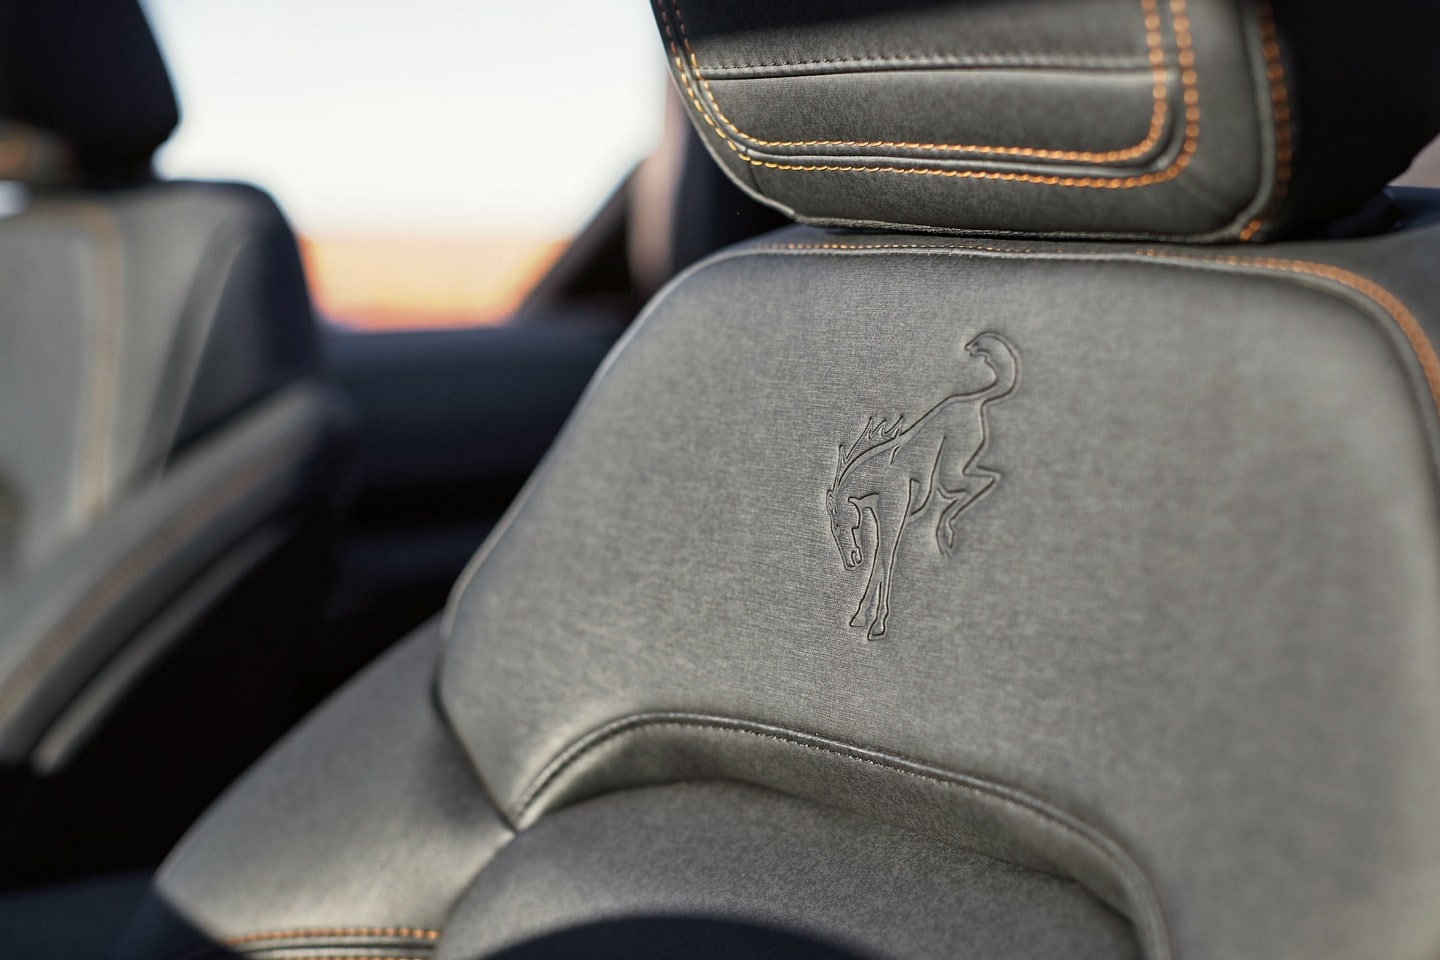 Close-up photo of the Bronco® logo embossed on the headrest